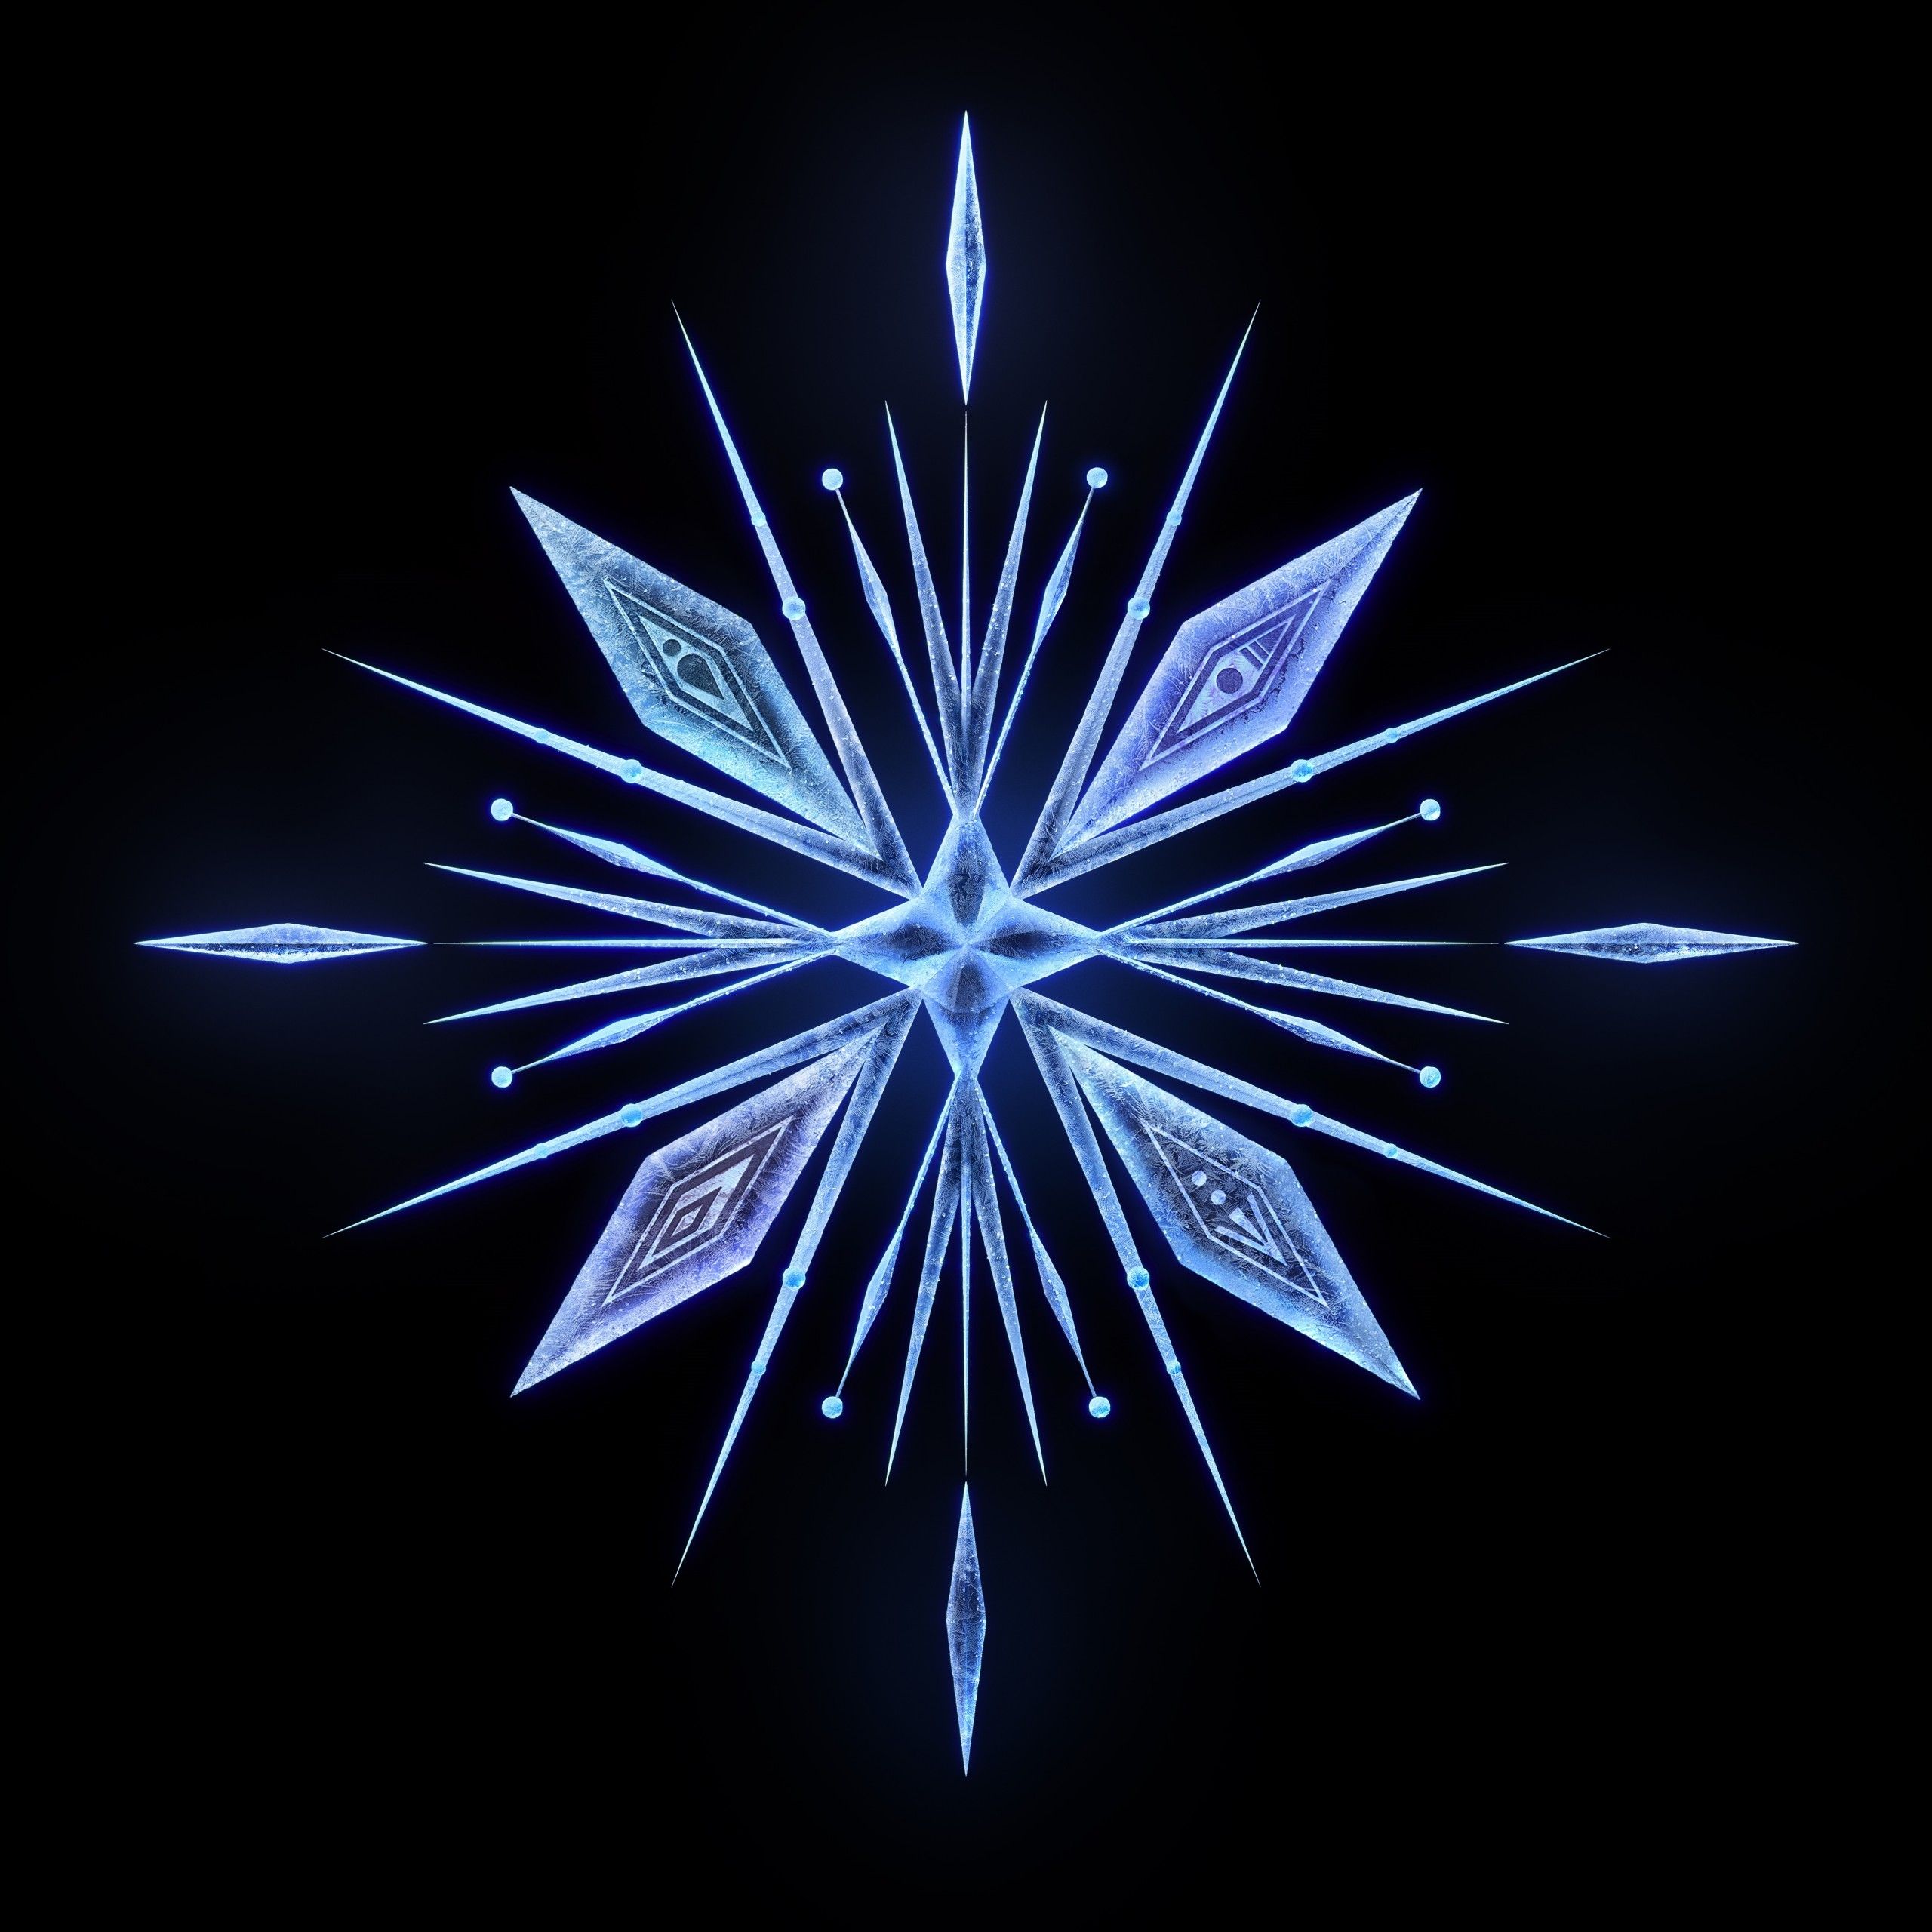 Frozen for android download